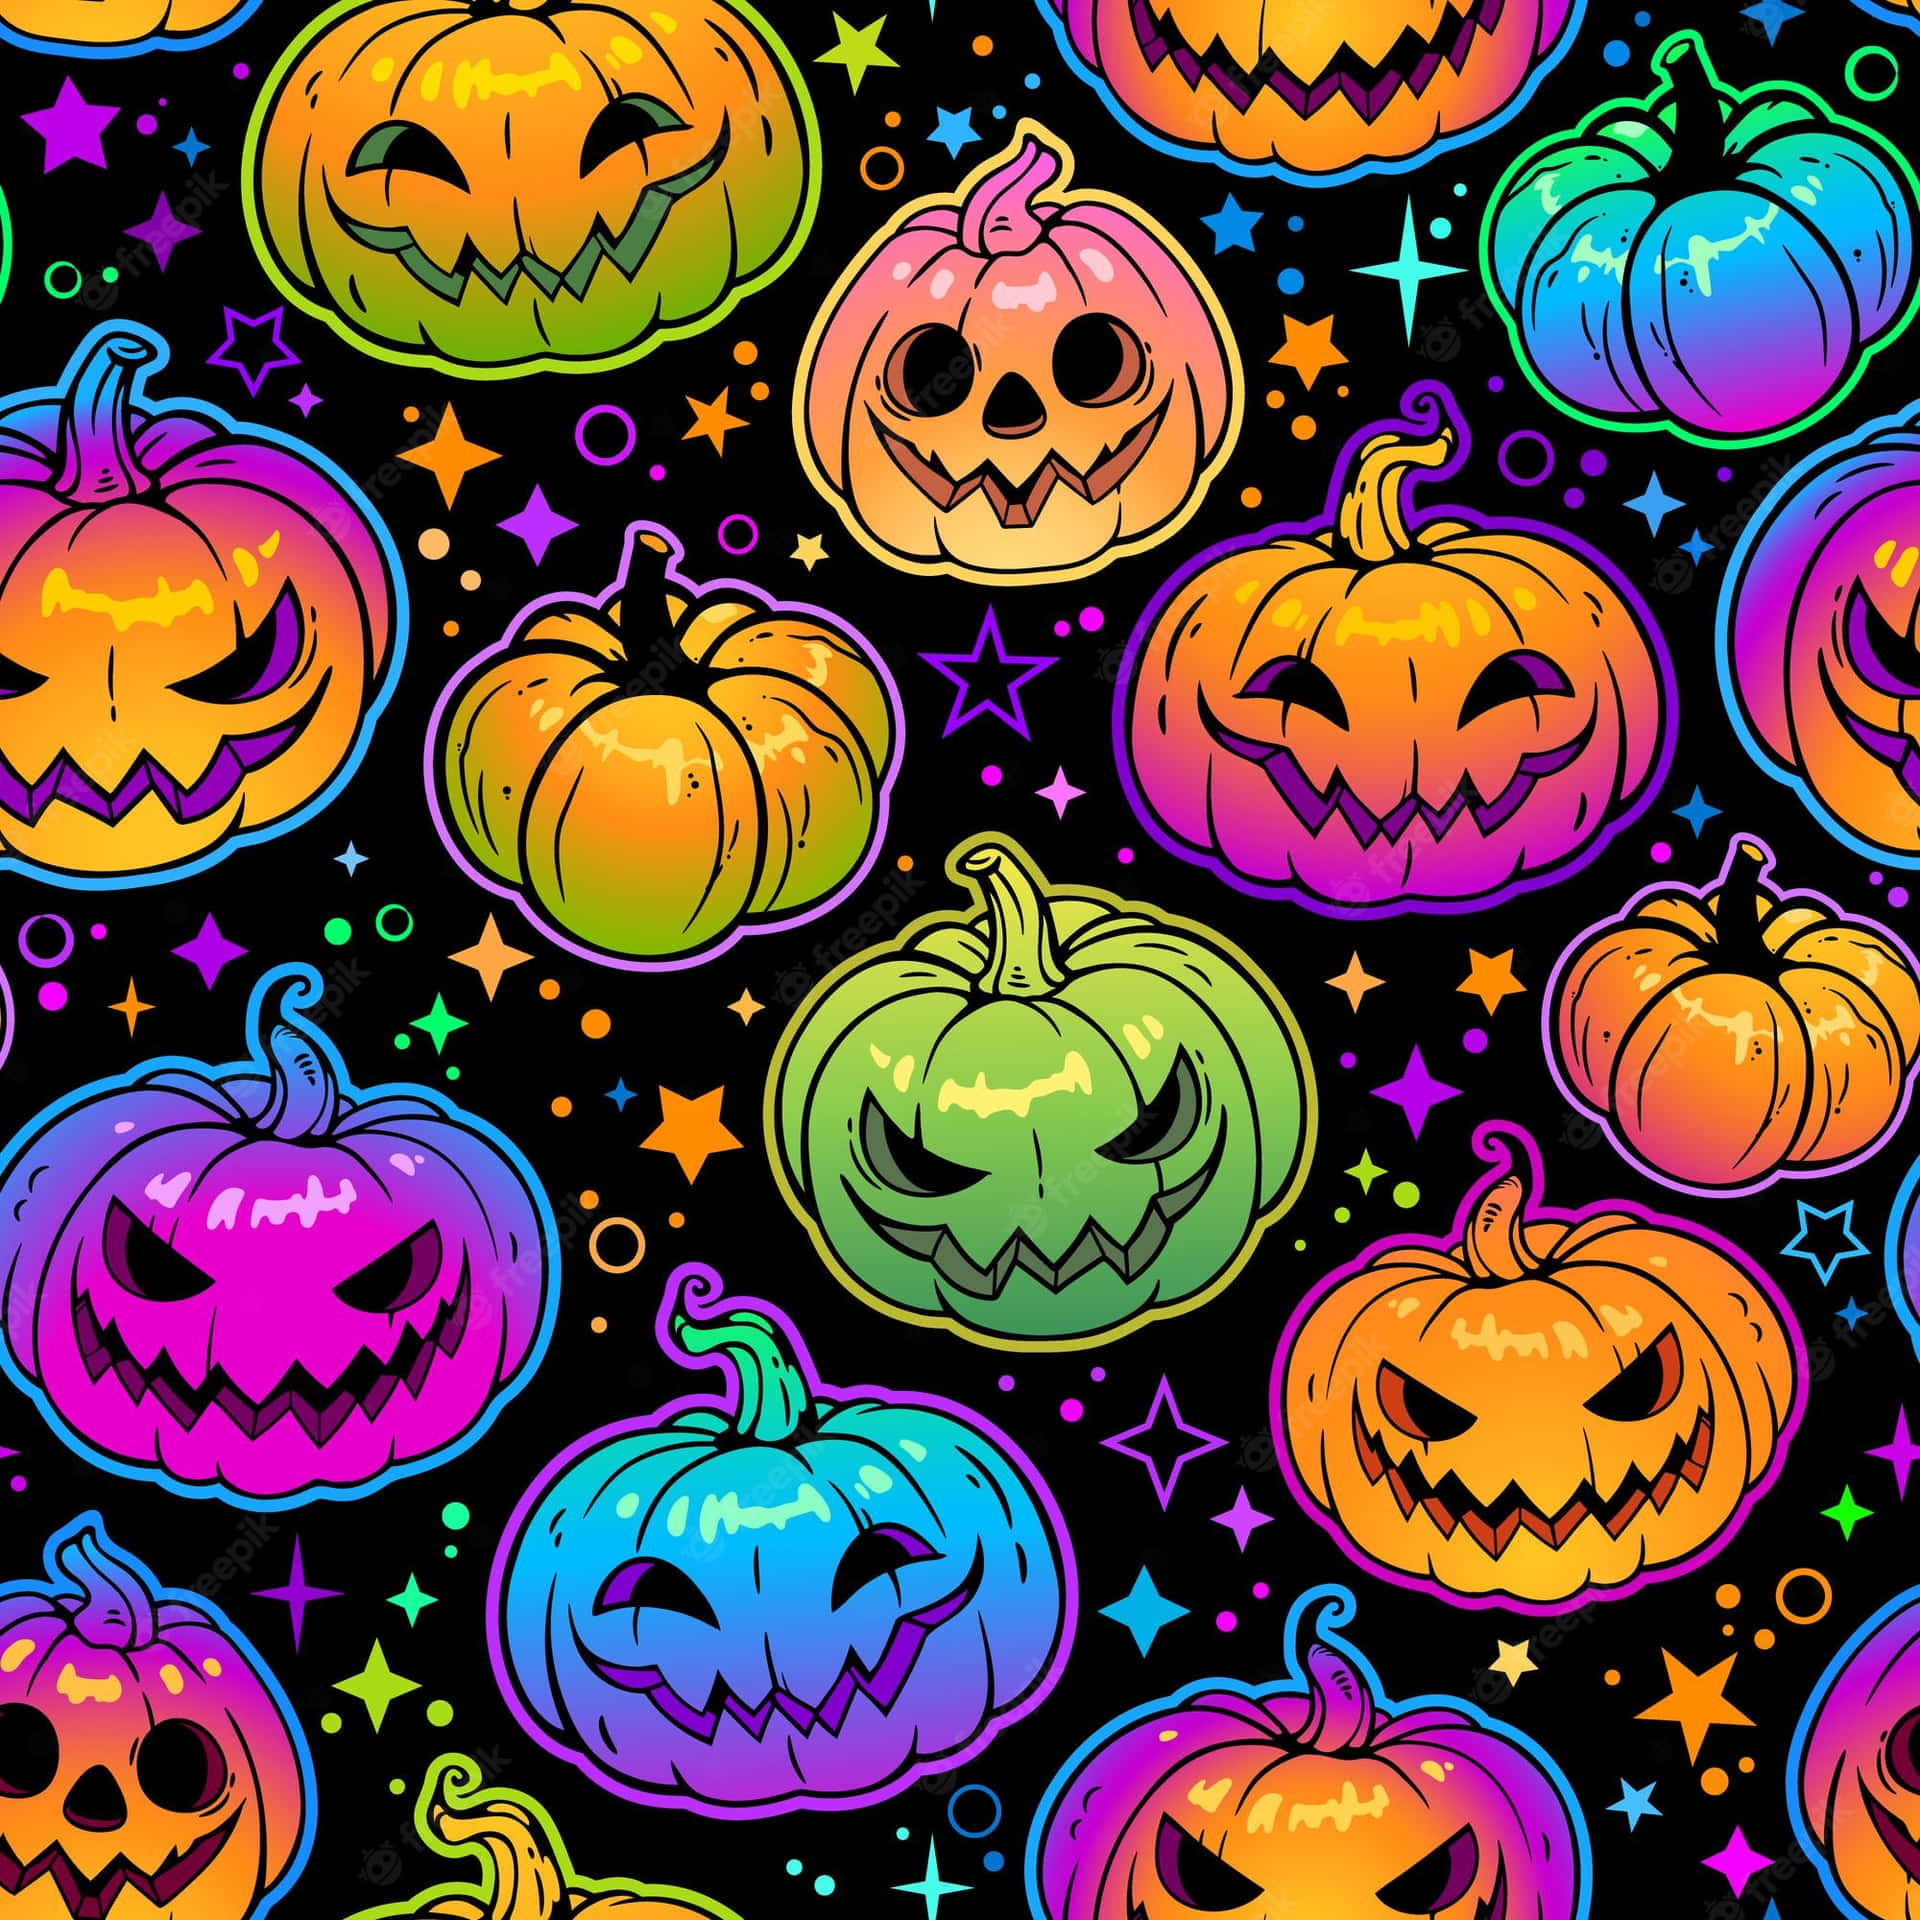 Have A Spooky And Stylish Girly Halloween Wallpaper